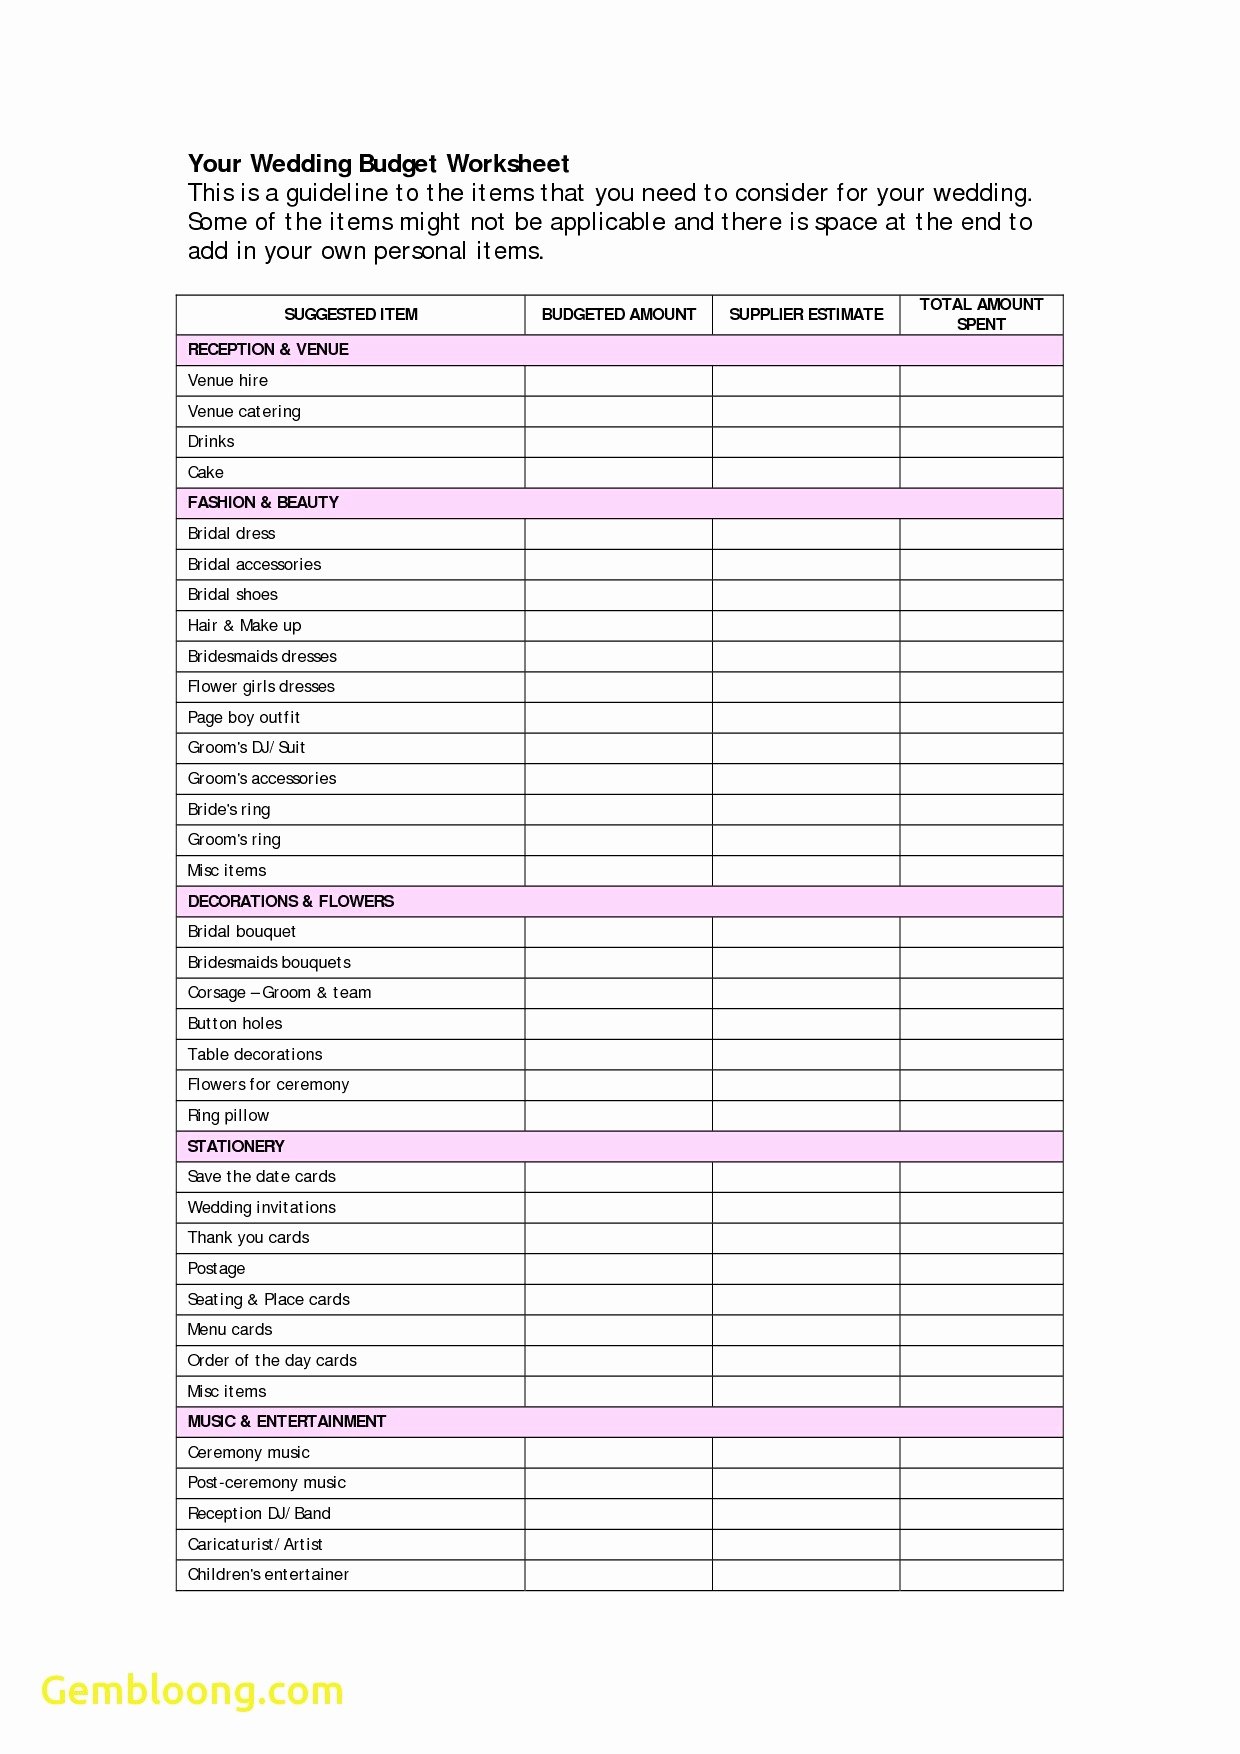 Wedding Vendor List Template Fresh Spreadsheet Template Page 12 How Do I Add A Signature to